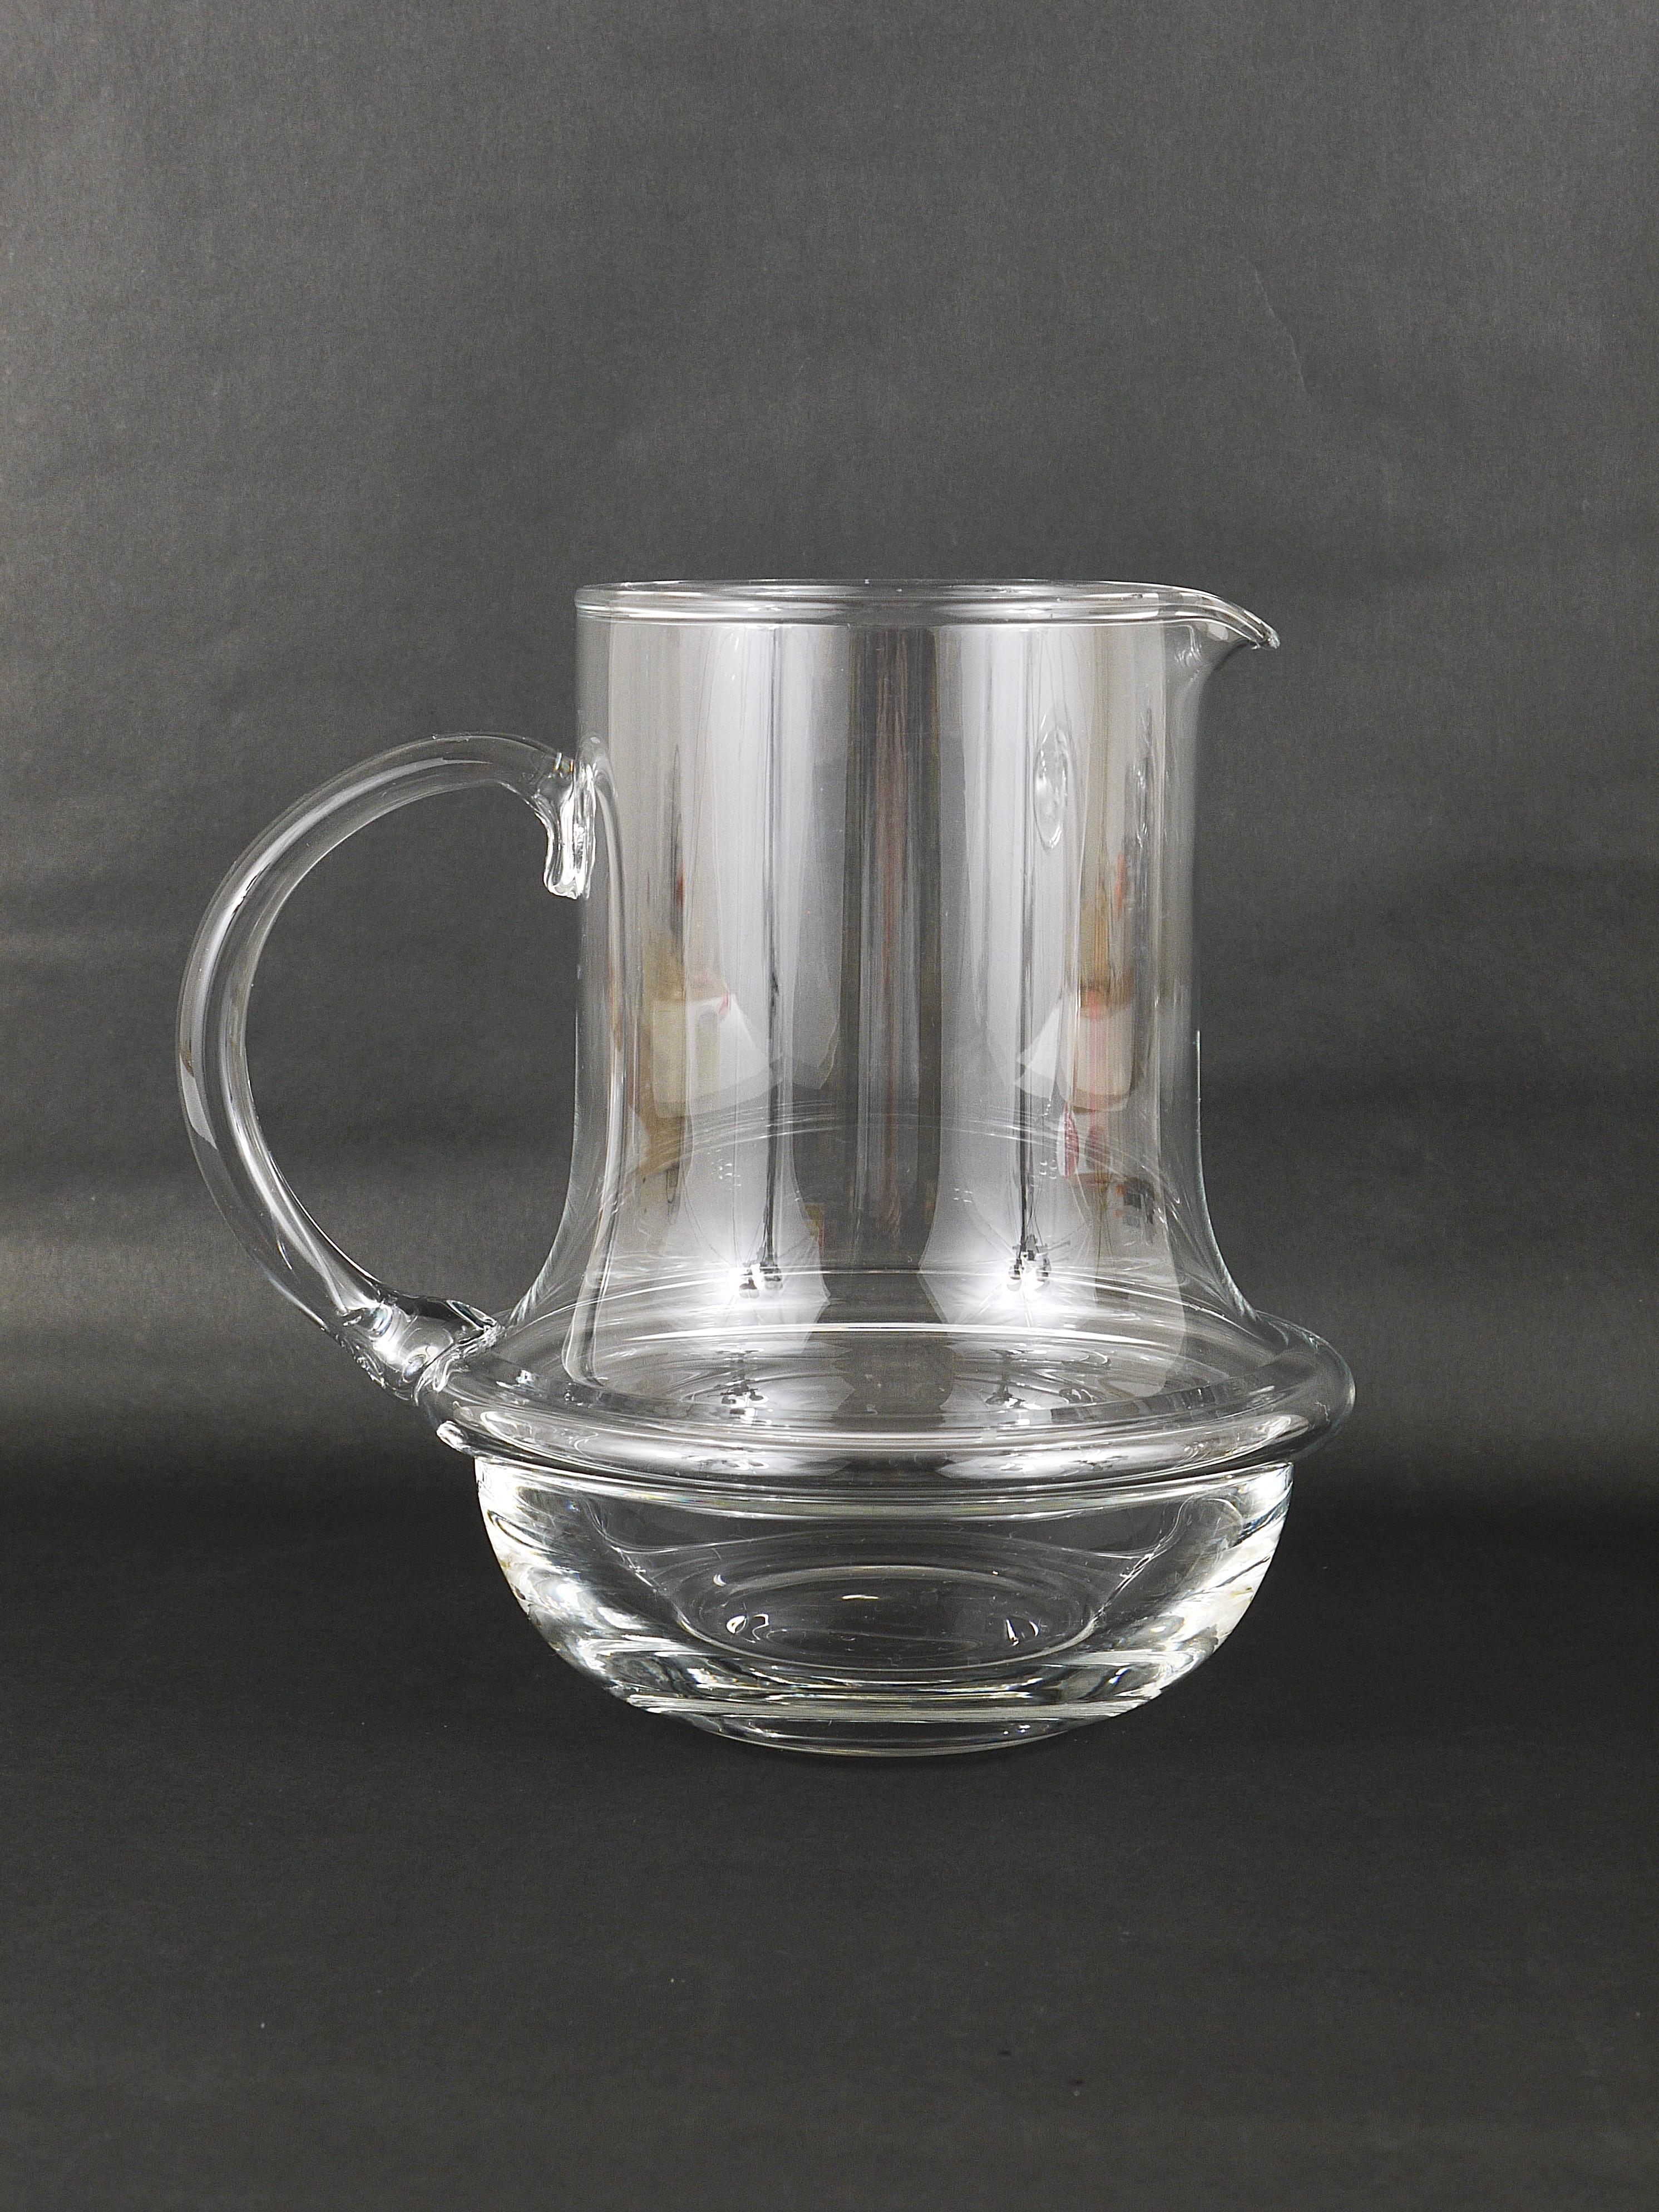 A beautiful pitcher or jug for water, soft drinks or juice, designed by Carl Auböck, executed by Ostovics Culinar in Austria in the 1970s. A beautiful, unusual and rare piece in excellent condition.